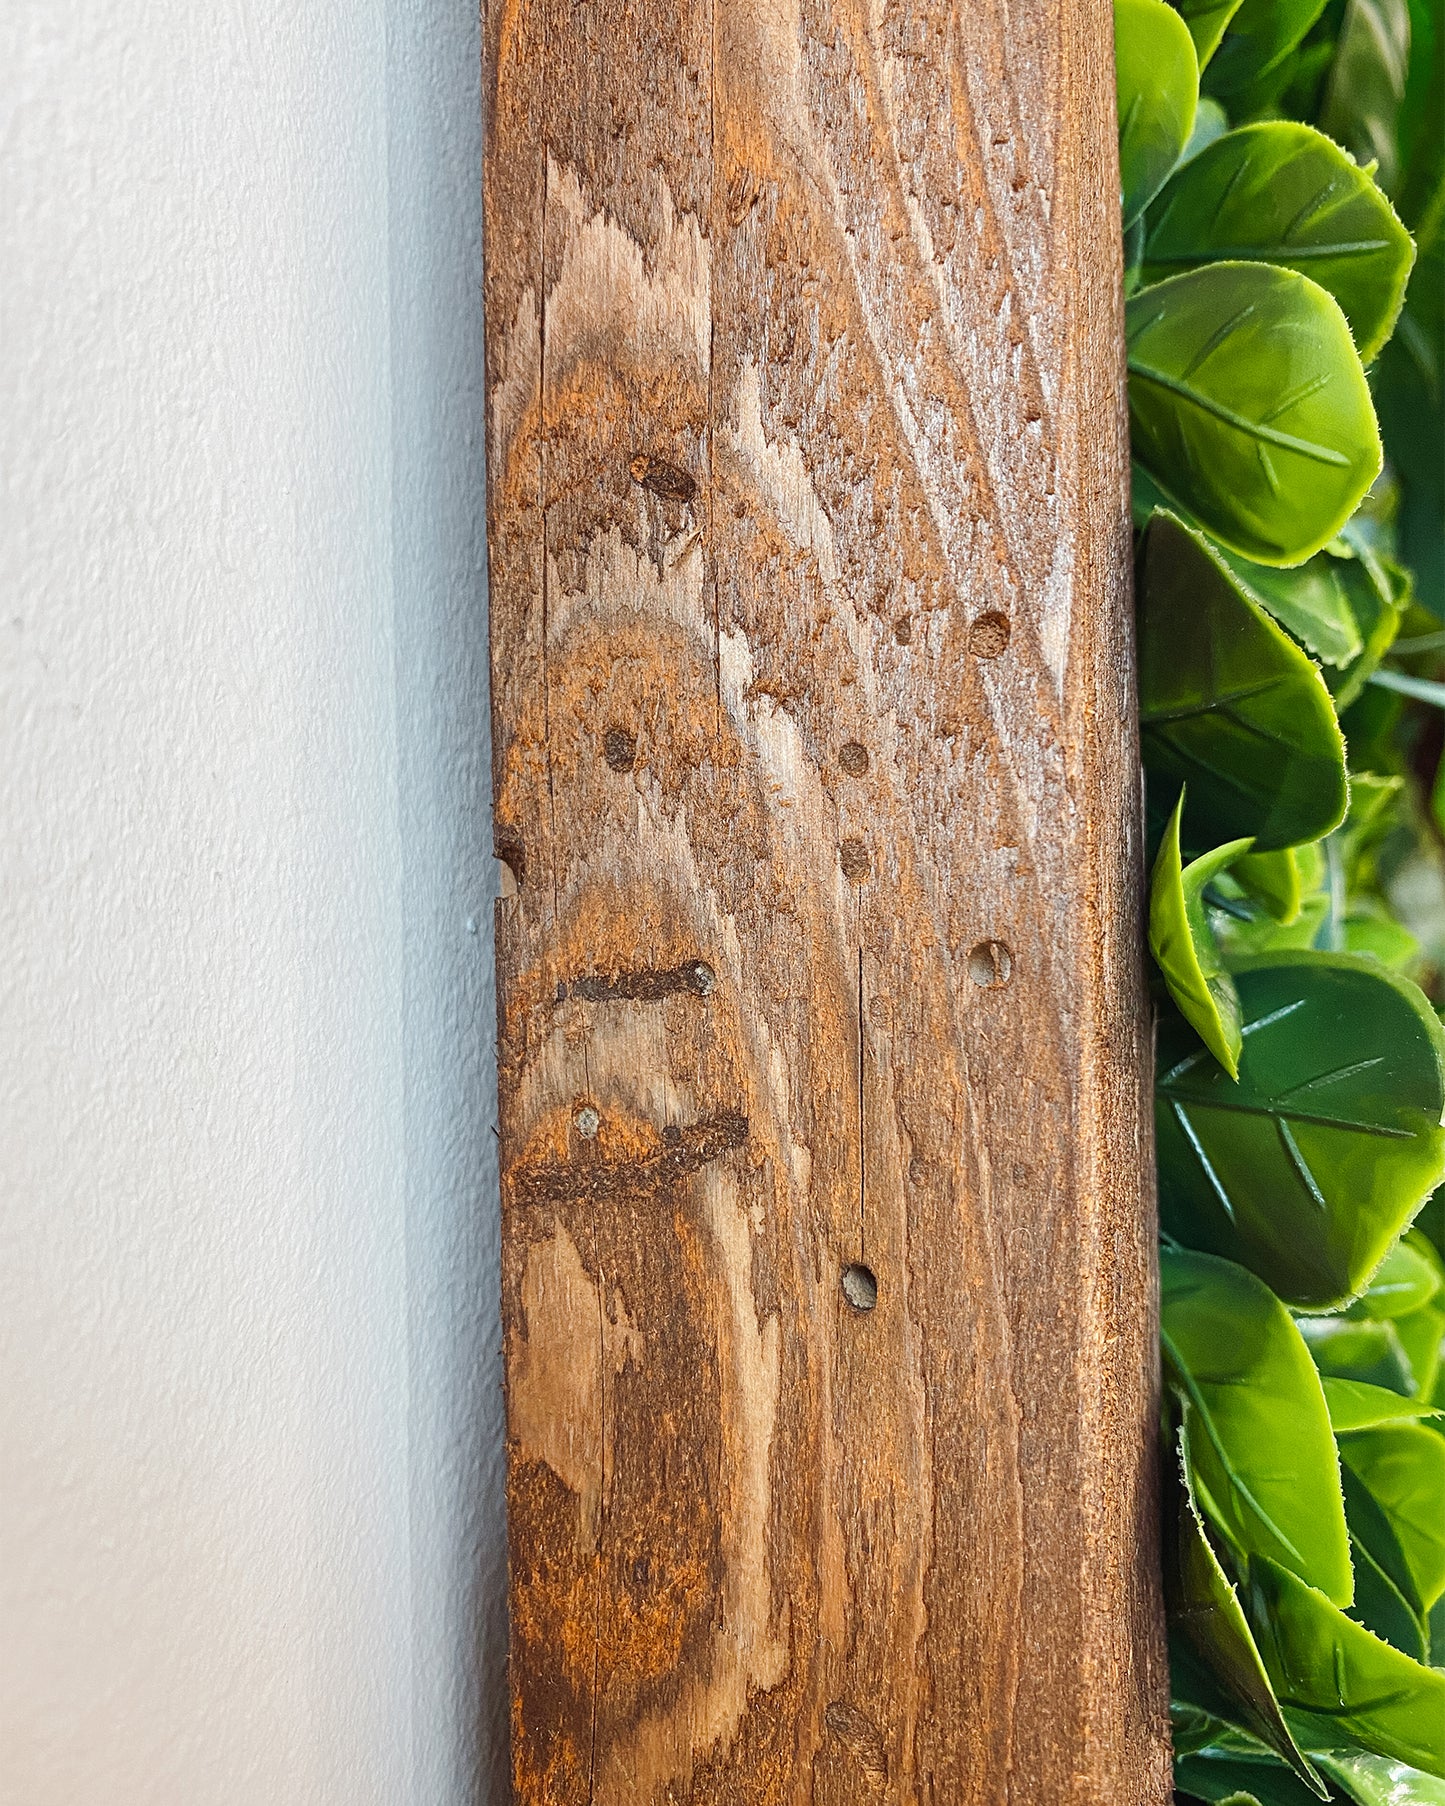 Plantframe/plant wall/moss wall "CALI" made of Realtouch artificial plants with spruce wood frame